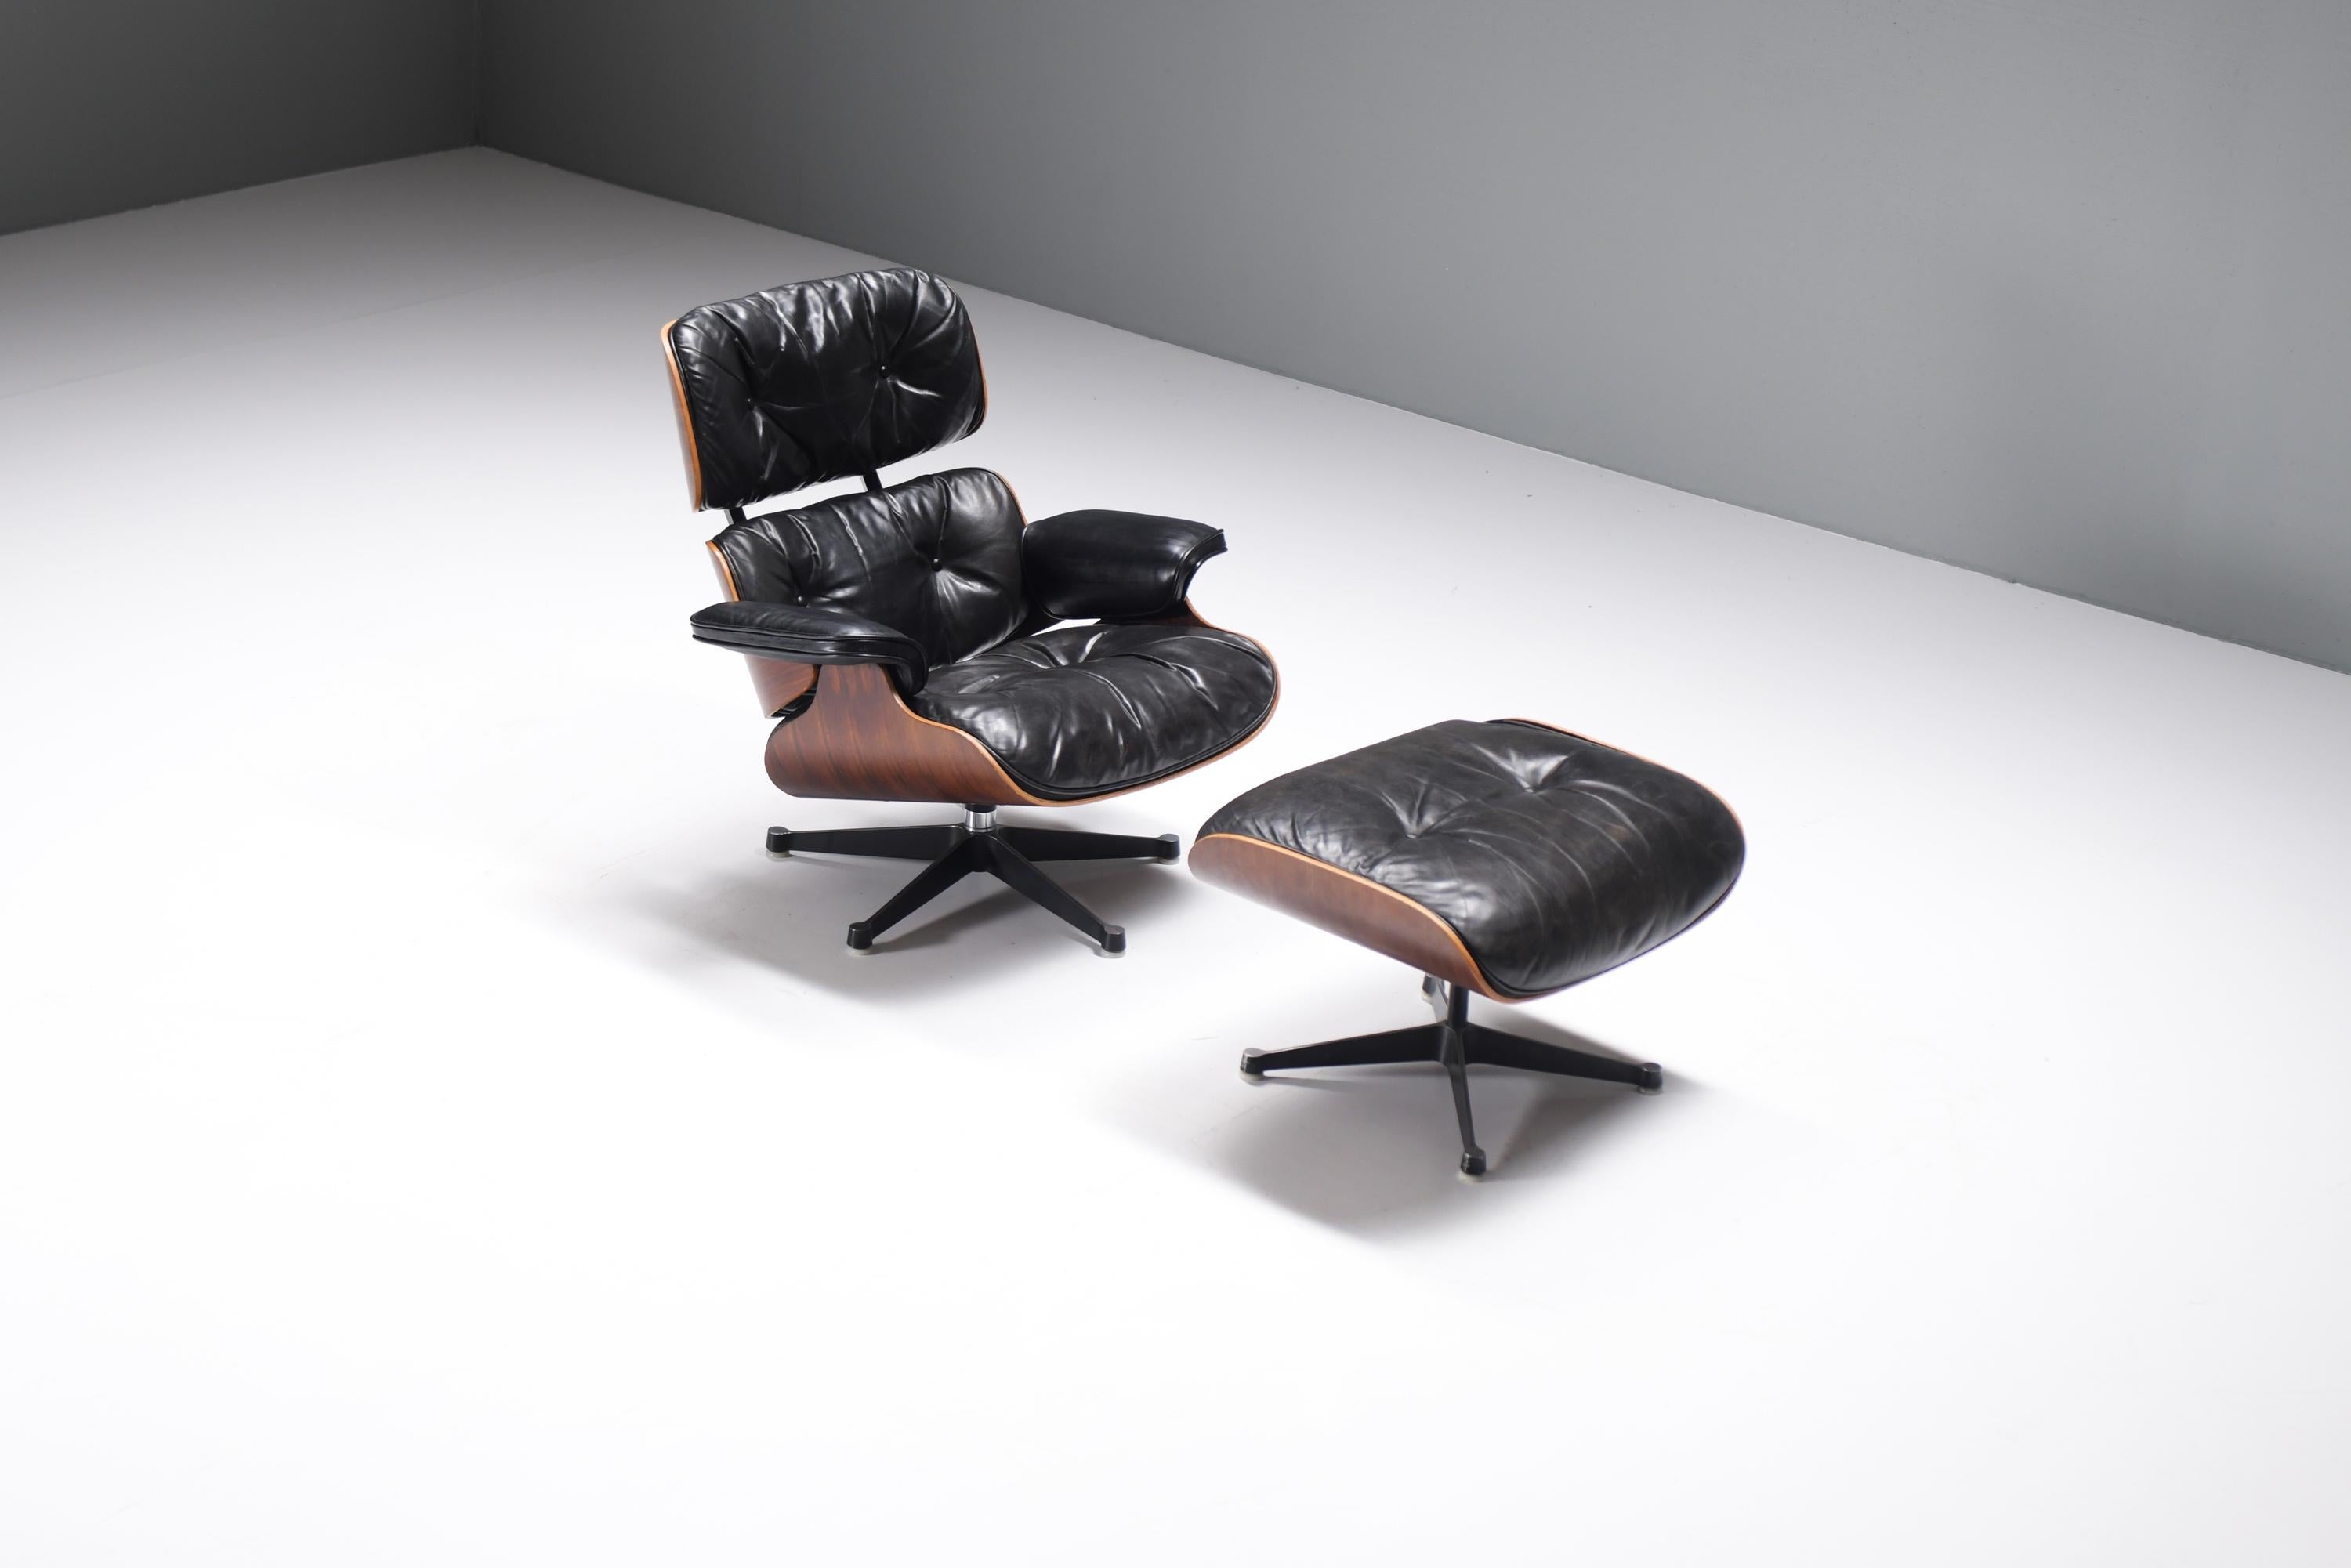 French Eames lounge by Ray & Charles Eames by Mobilier International for Herman Miller